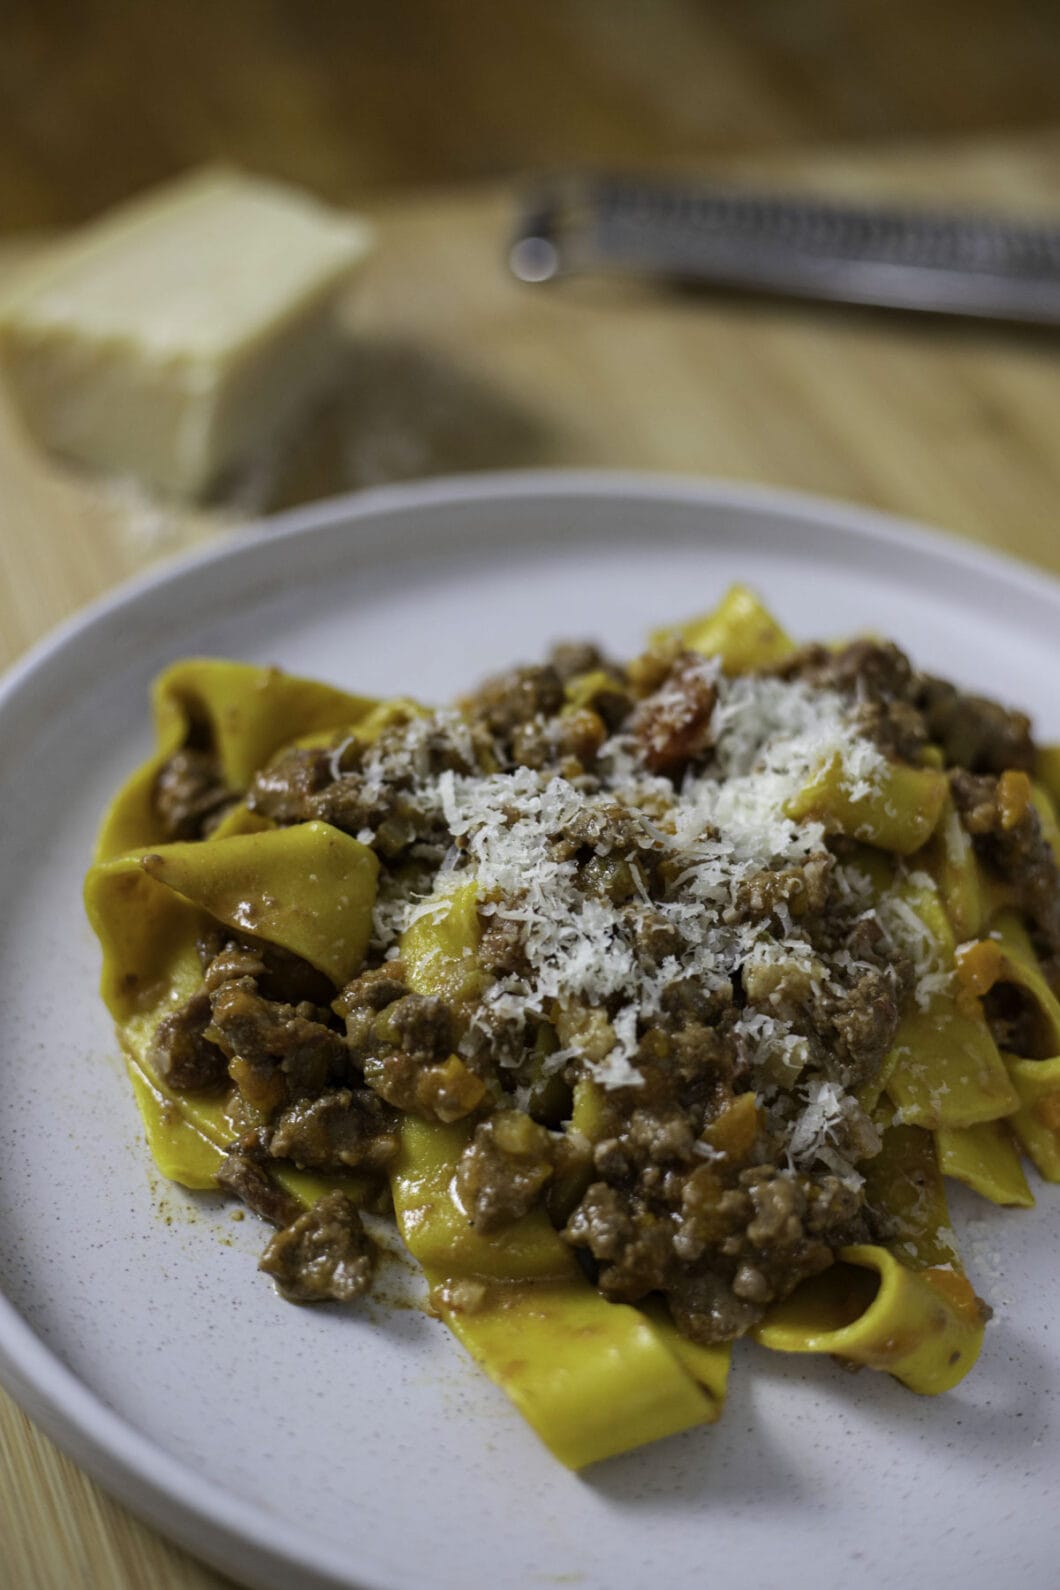 Authentic parpardelle alla bolognese with grated parmesan